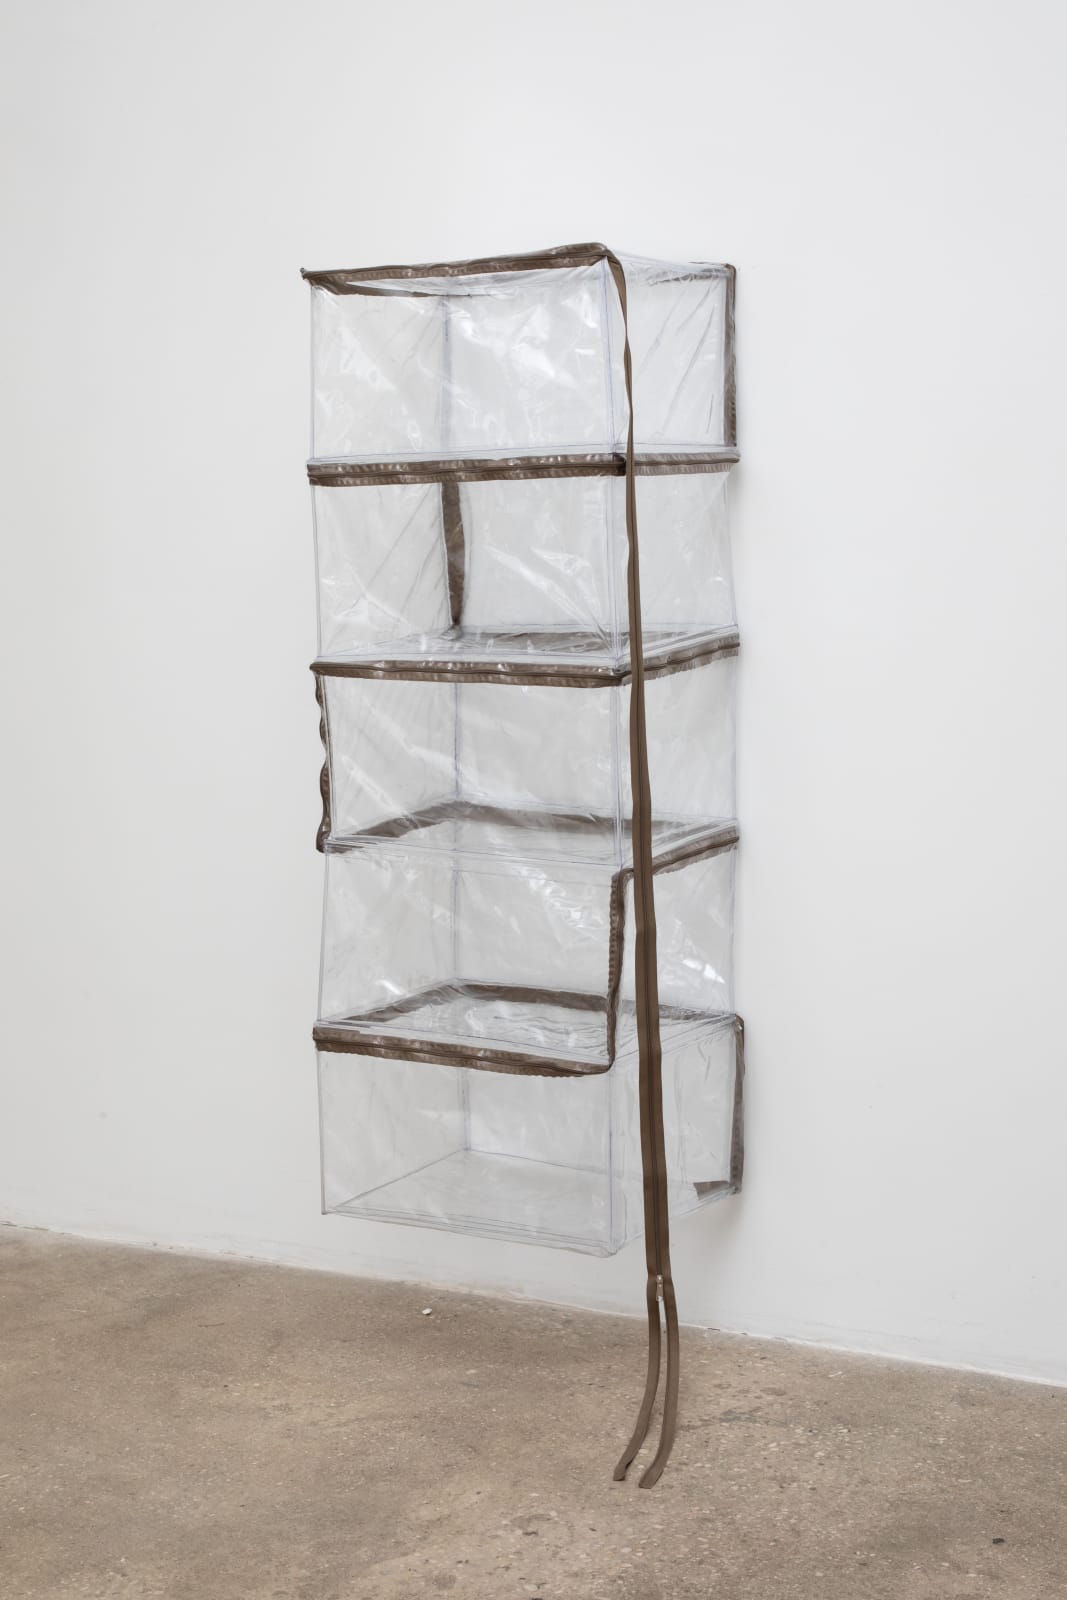 Alina Tenser, Container For Utterance, vacant, olive, 2022